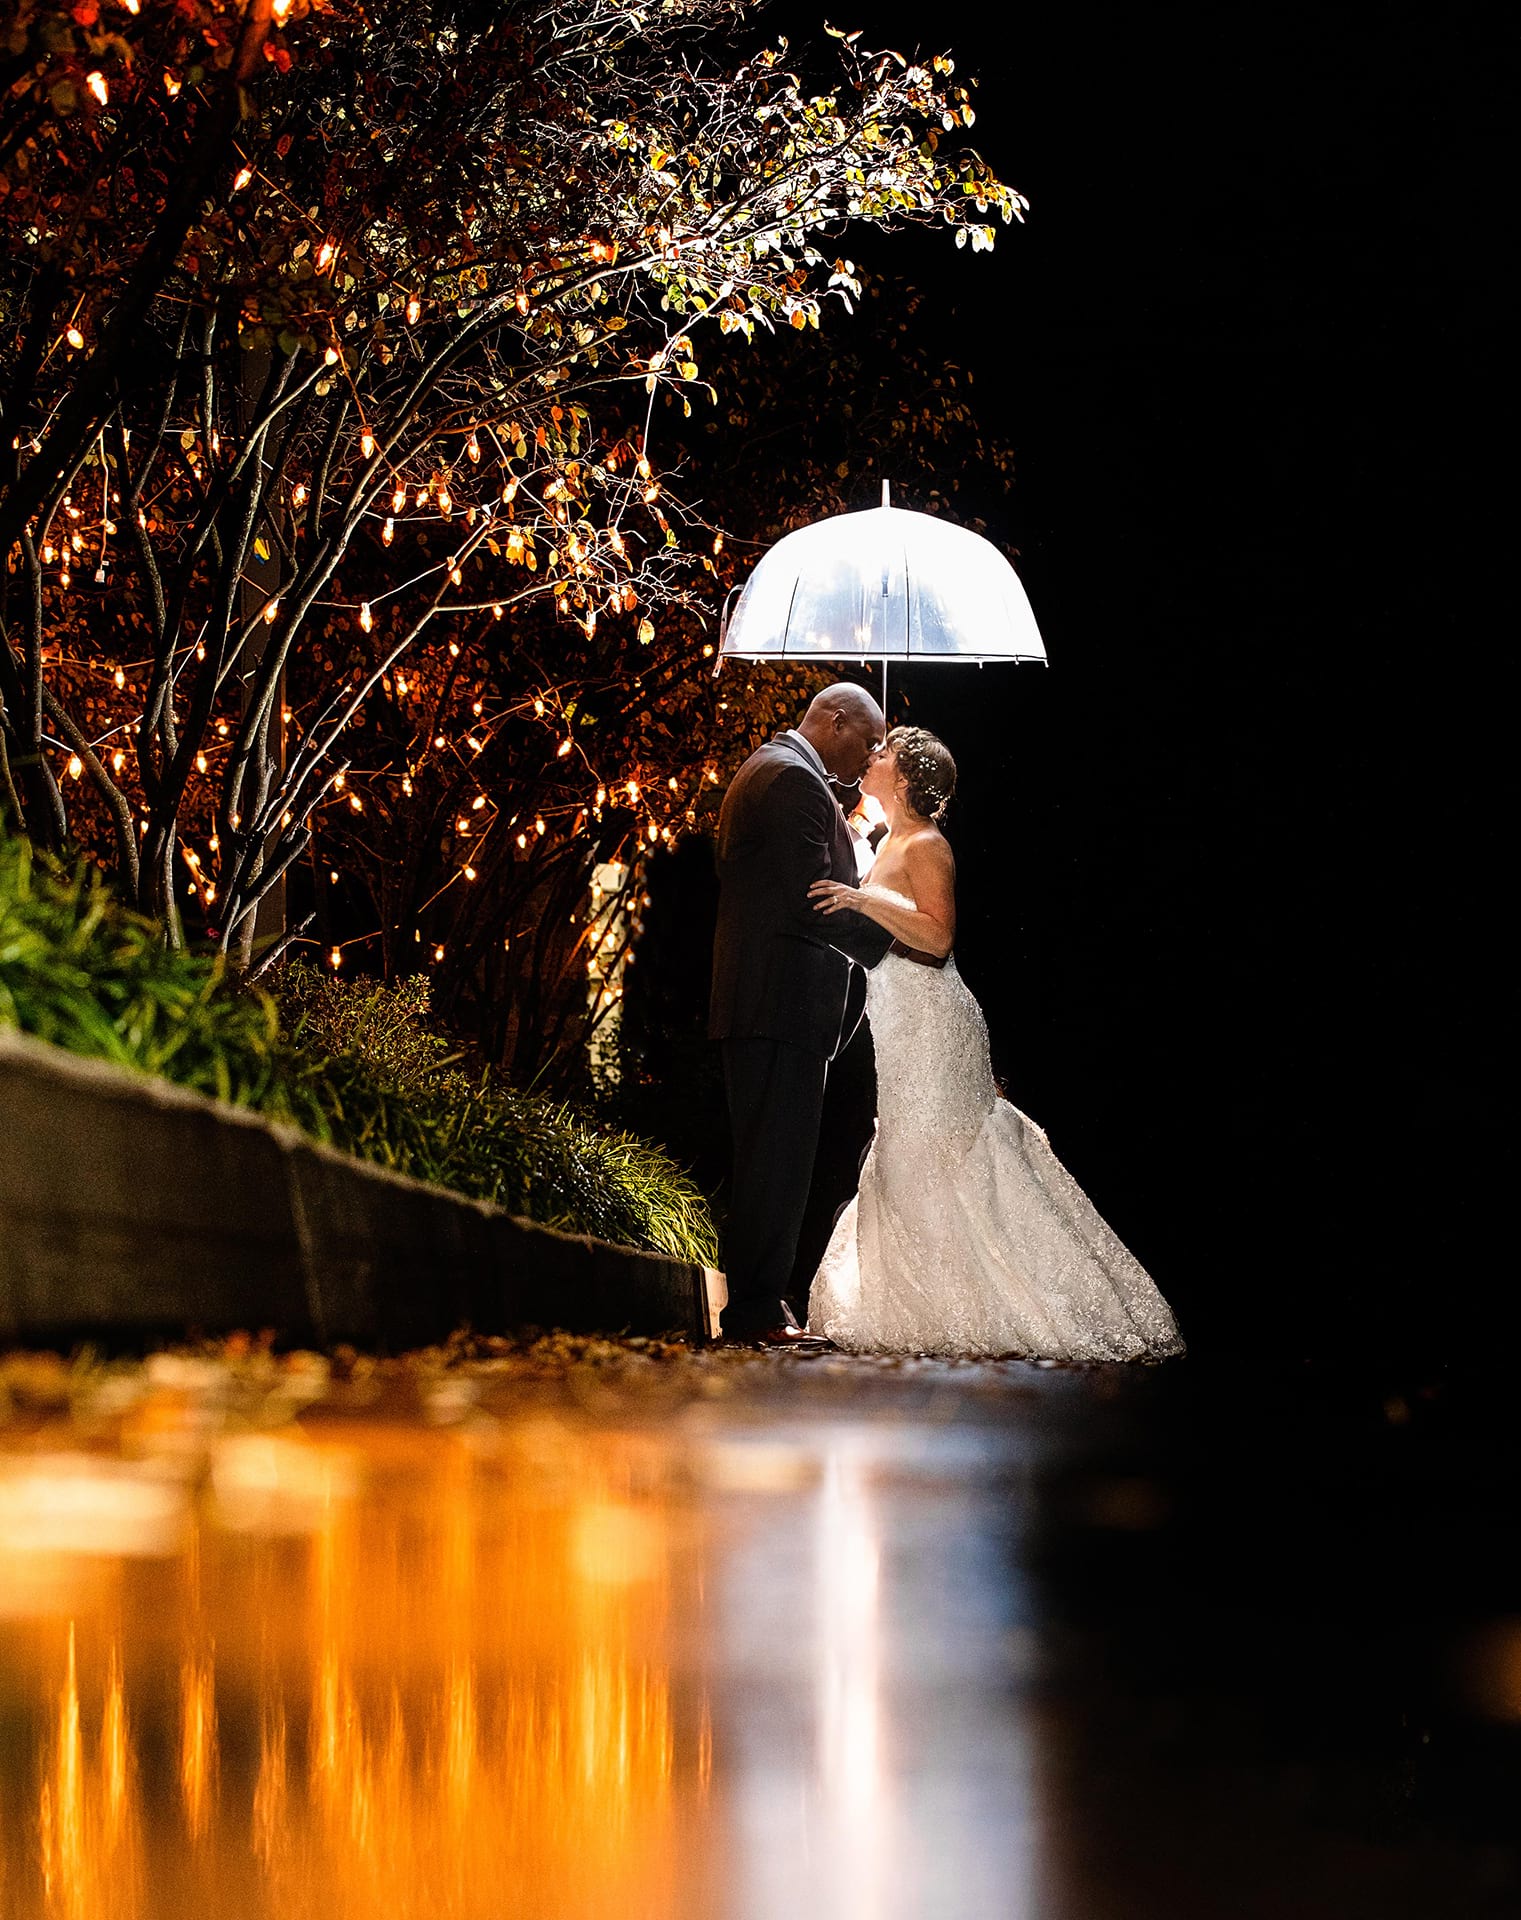 From elegant ballrooms to an exquisite golf course, Springfield is your destination wedding venue.